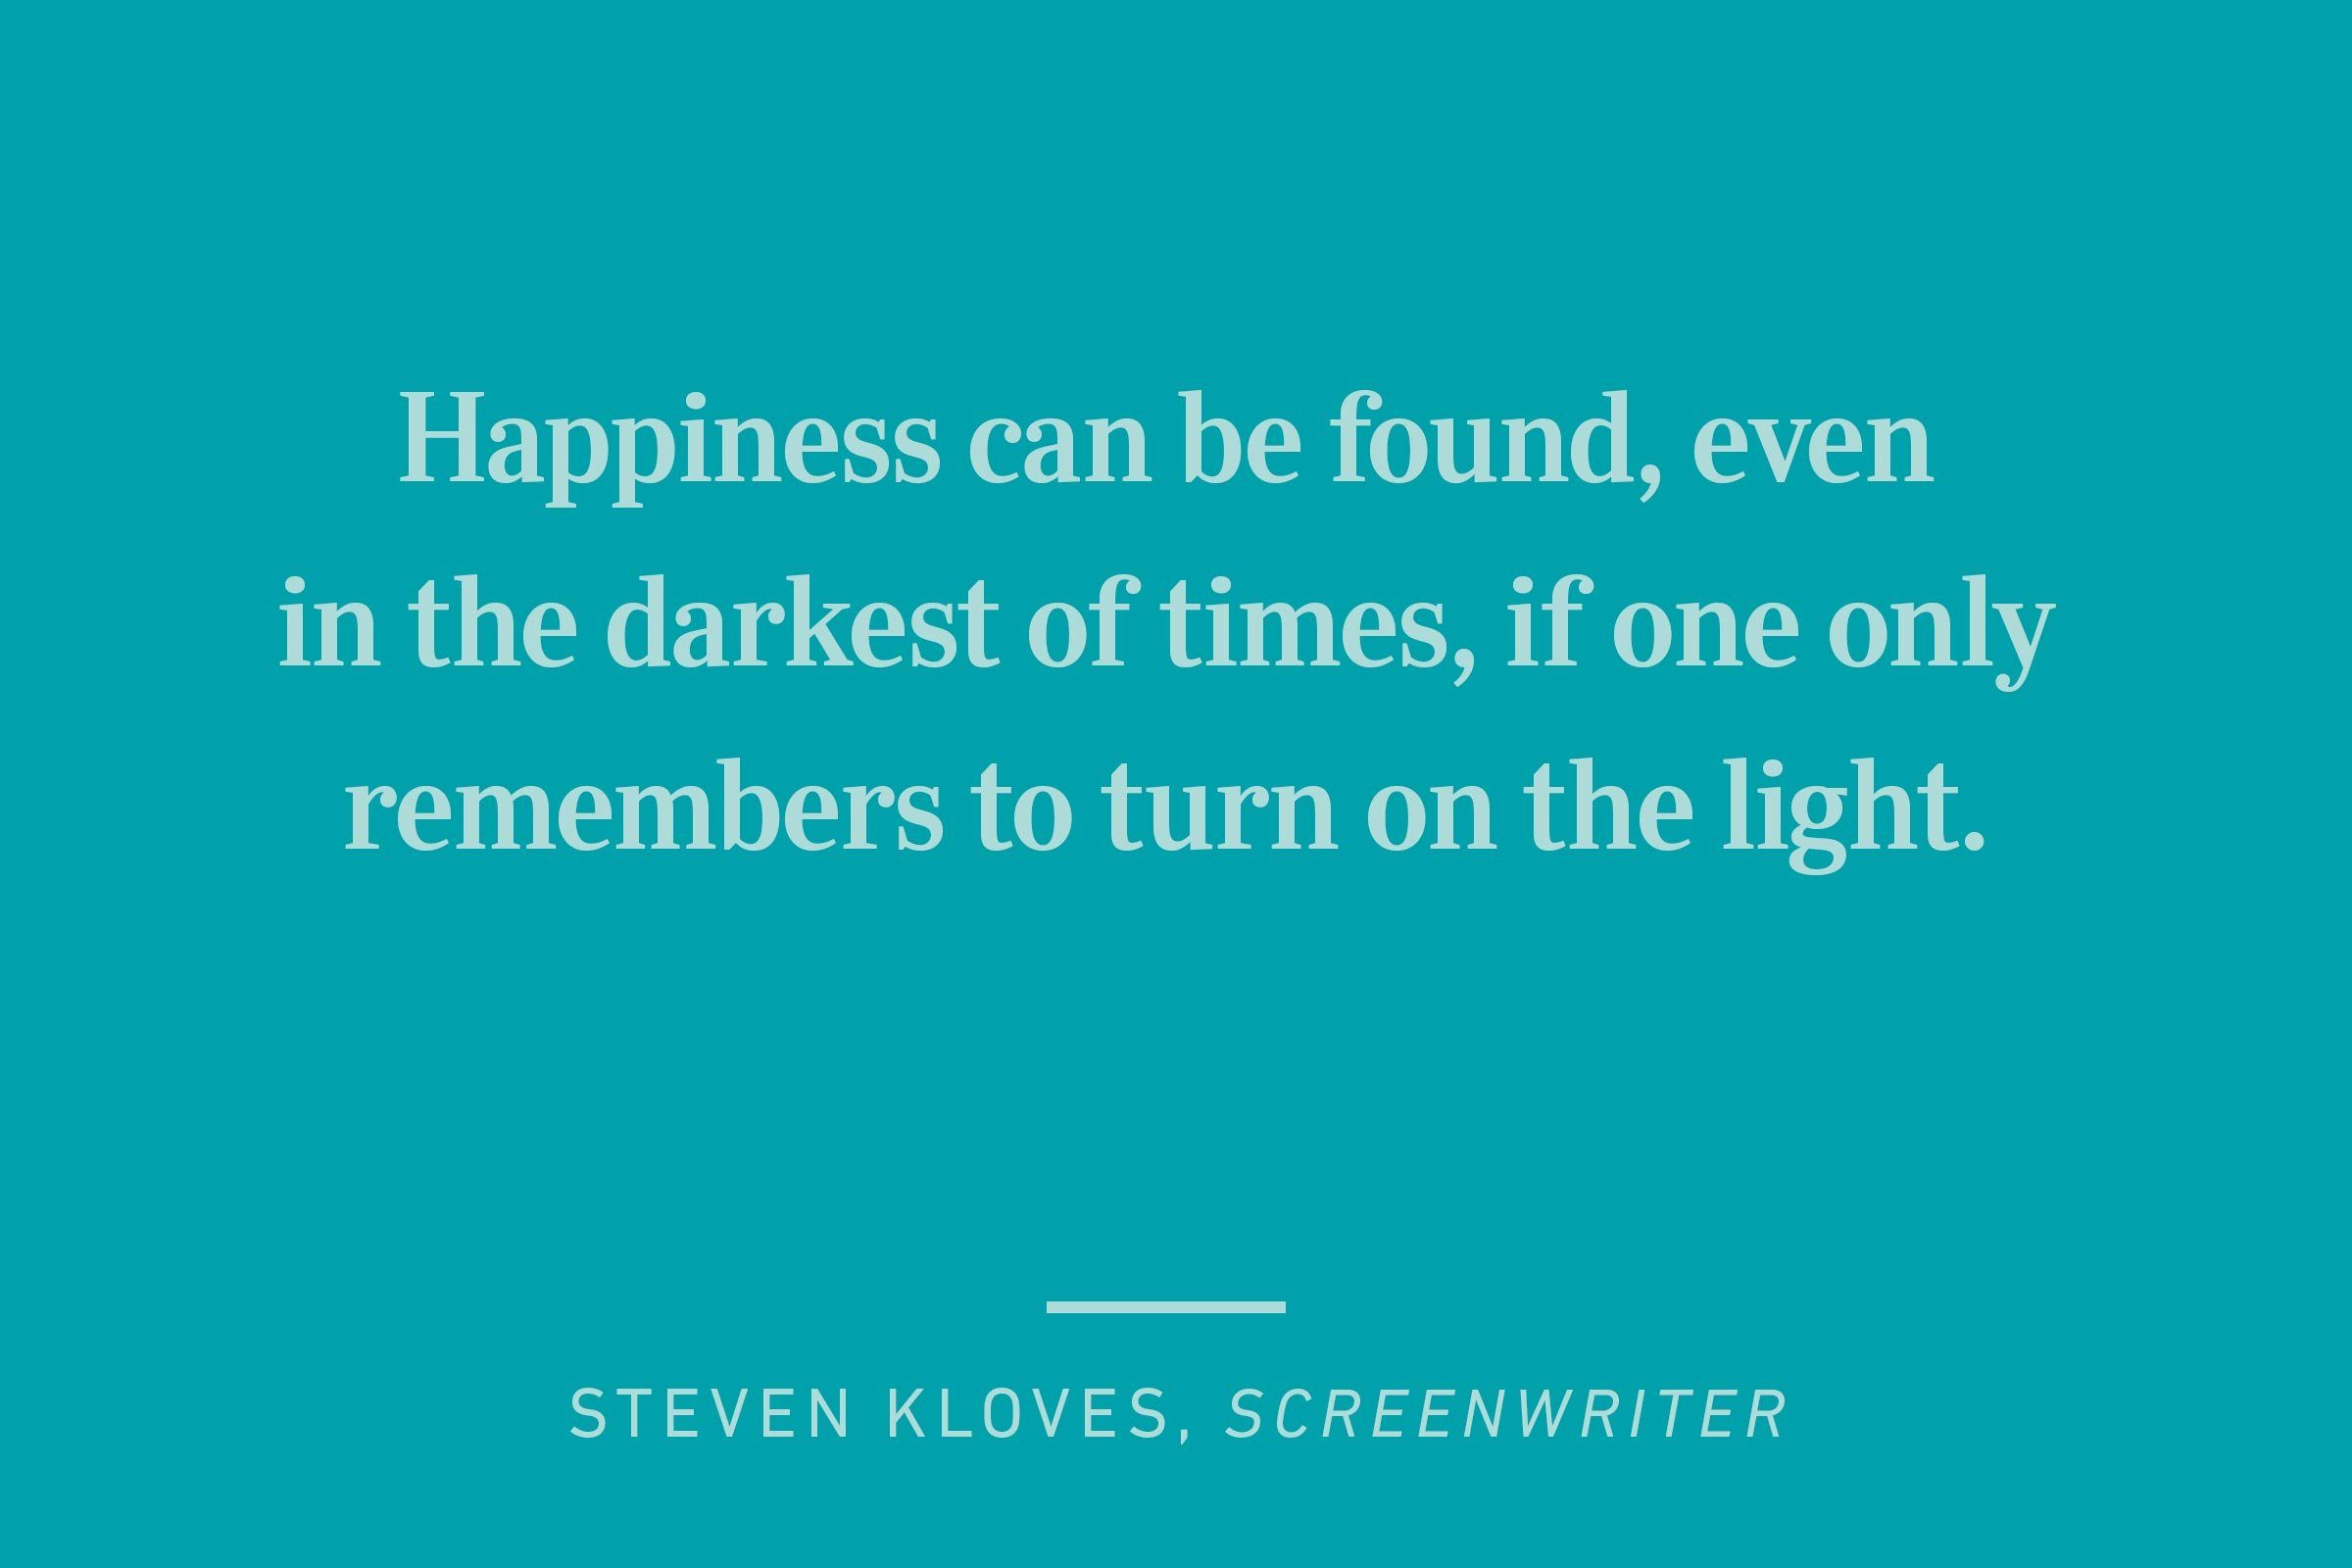 steven kloves happiness quote